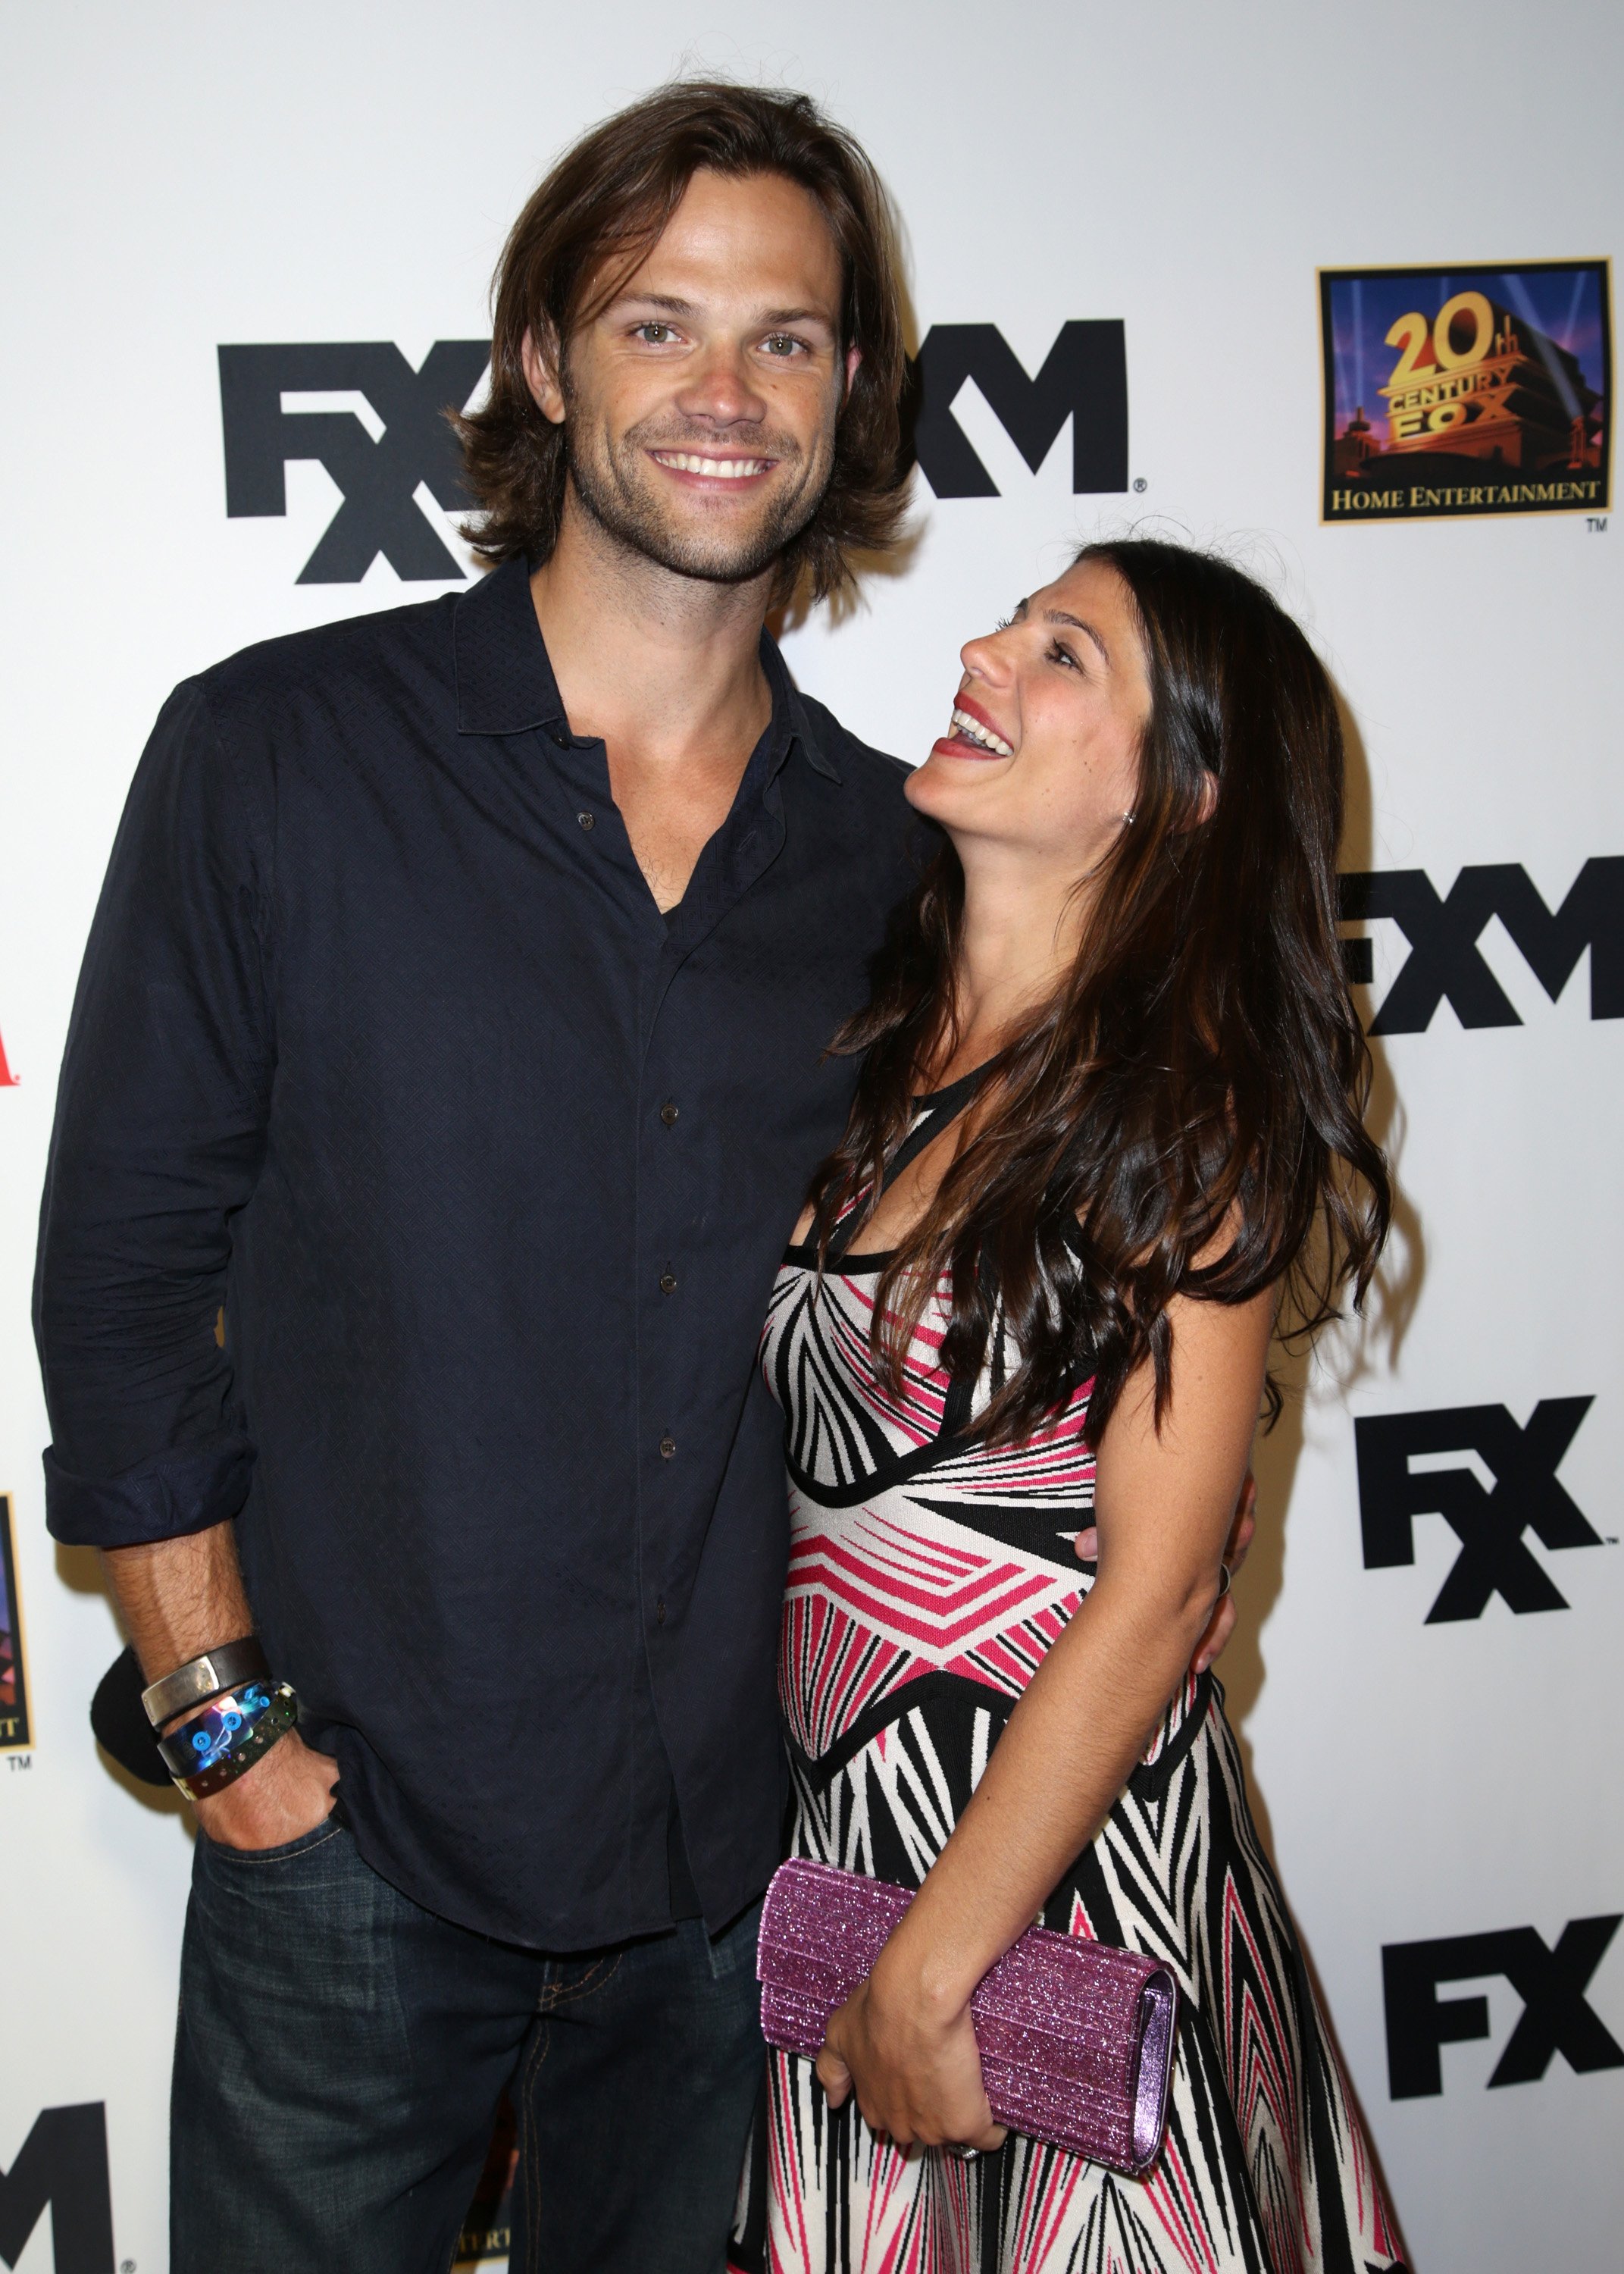 Jared Padalecki and his wife Genevieve Padalecki at the Maxim, FX, and Home Entertainment Comic-Con Party on July 19, 2013, in San Diego, California. | Source: Getty Images